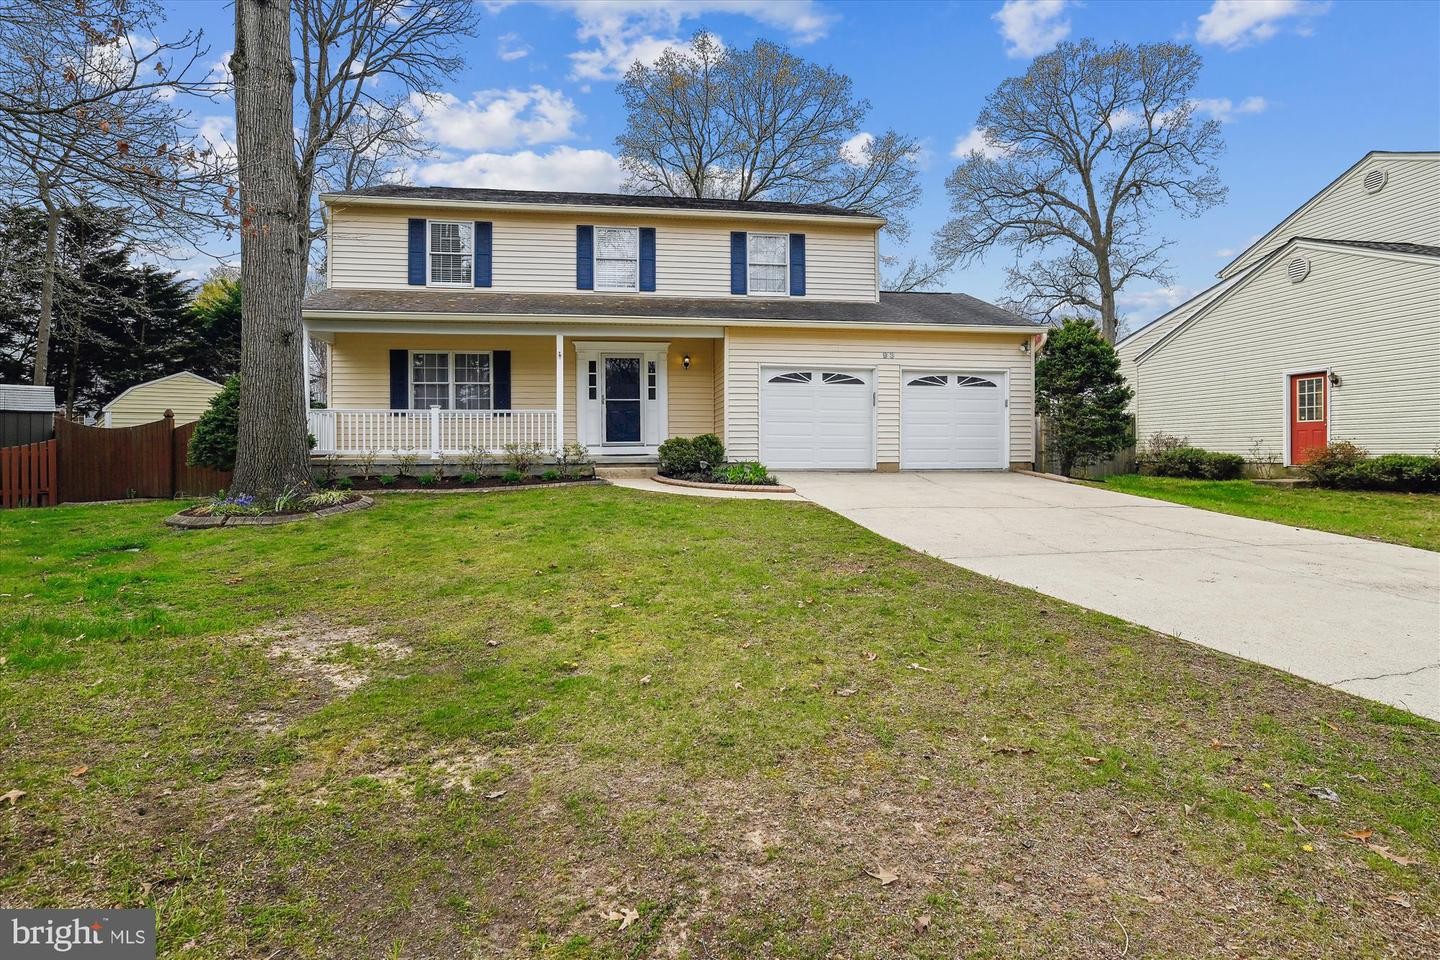 2. 93 Foxchase Ct